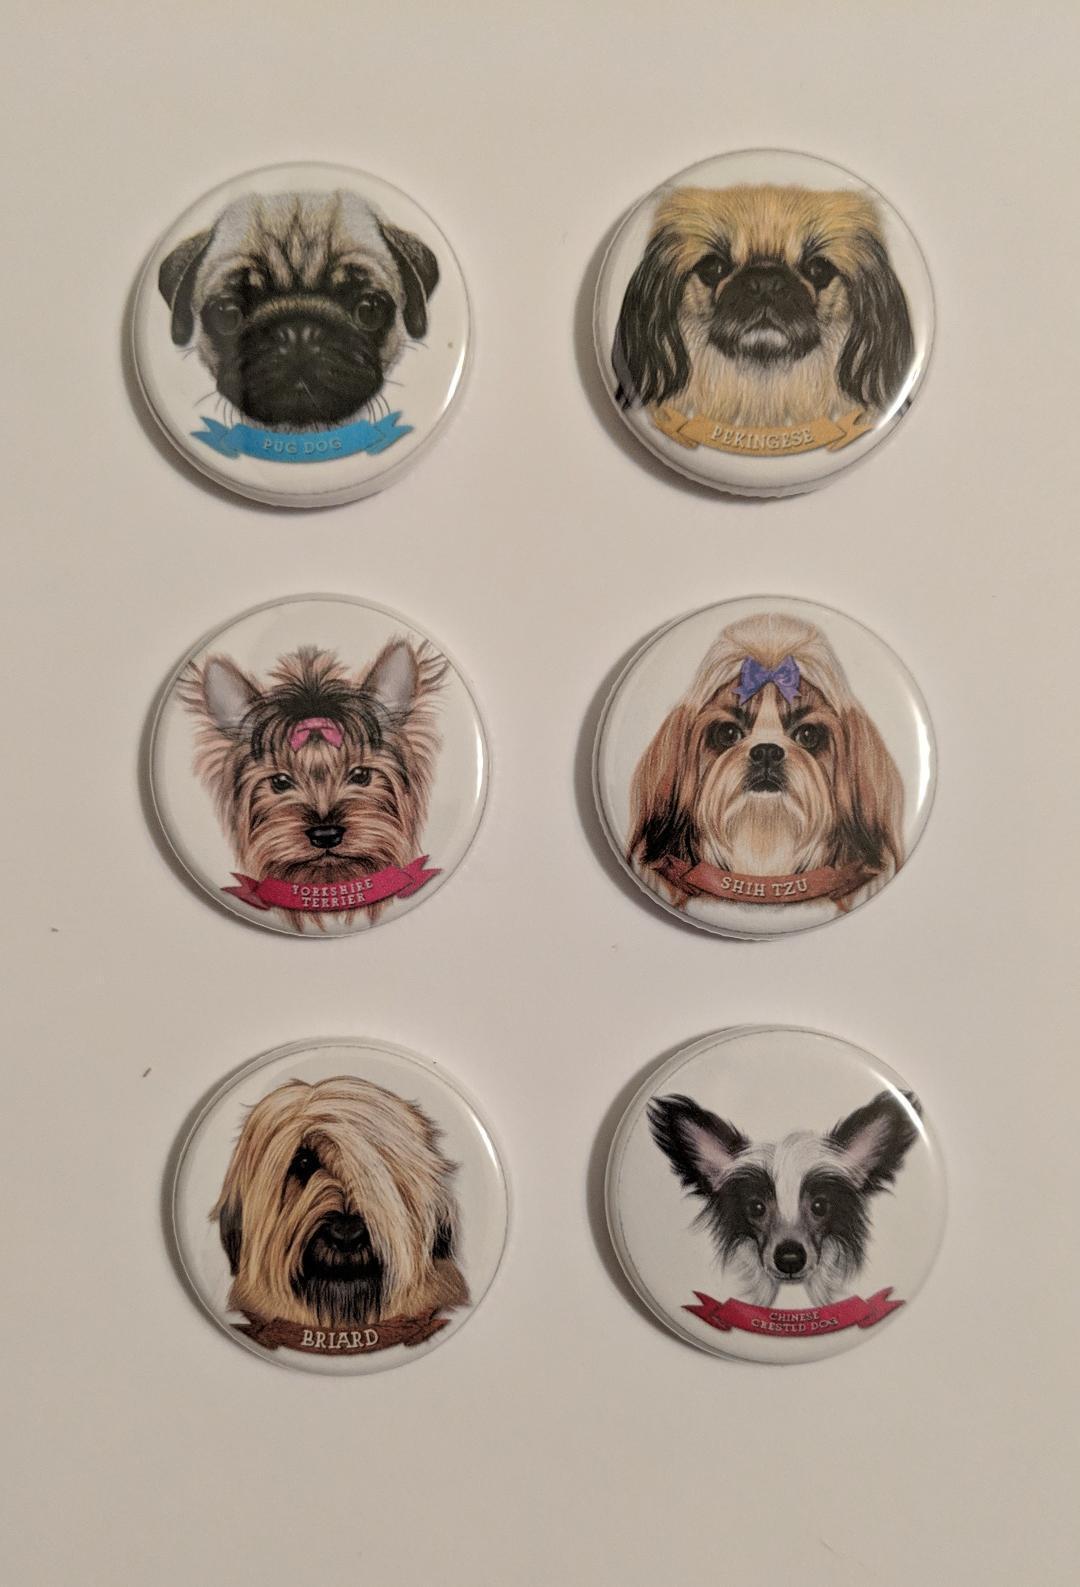 Lot of 6 1.25" Flatback Buttons Dogs (Approx. 32mm) #2 Handmade